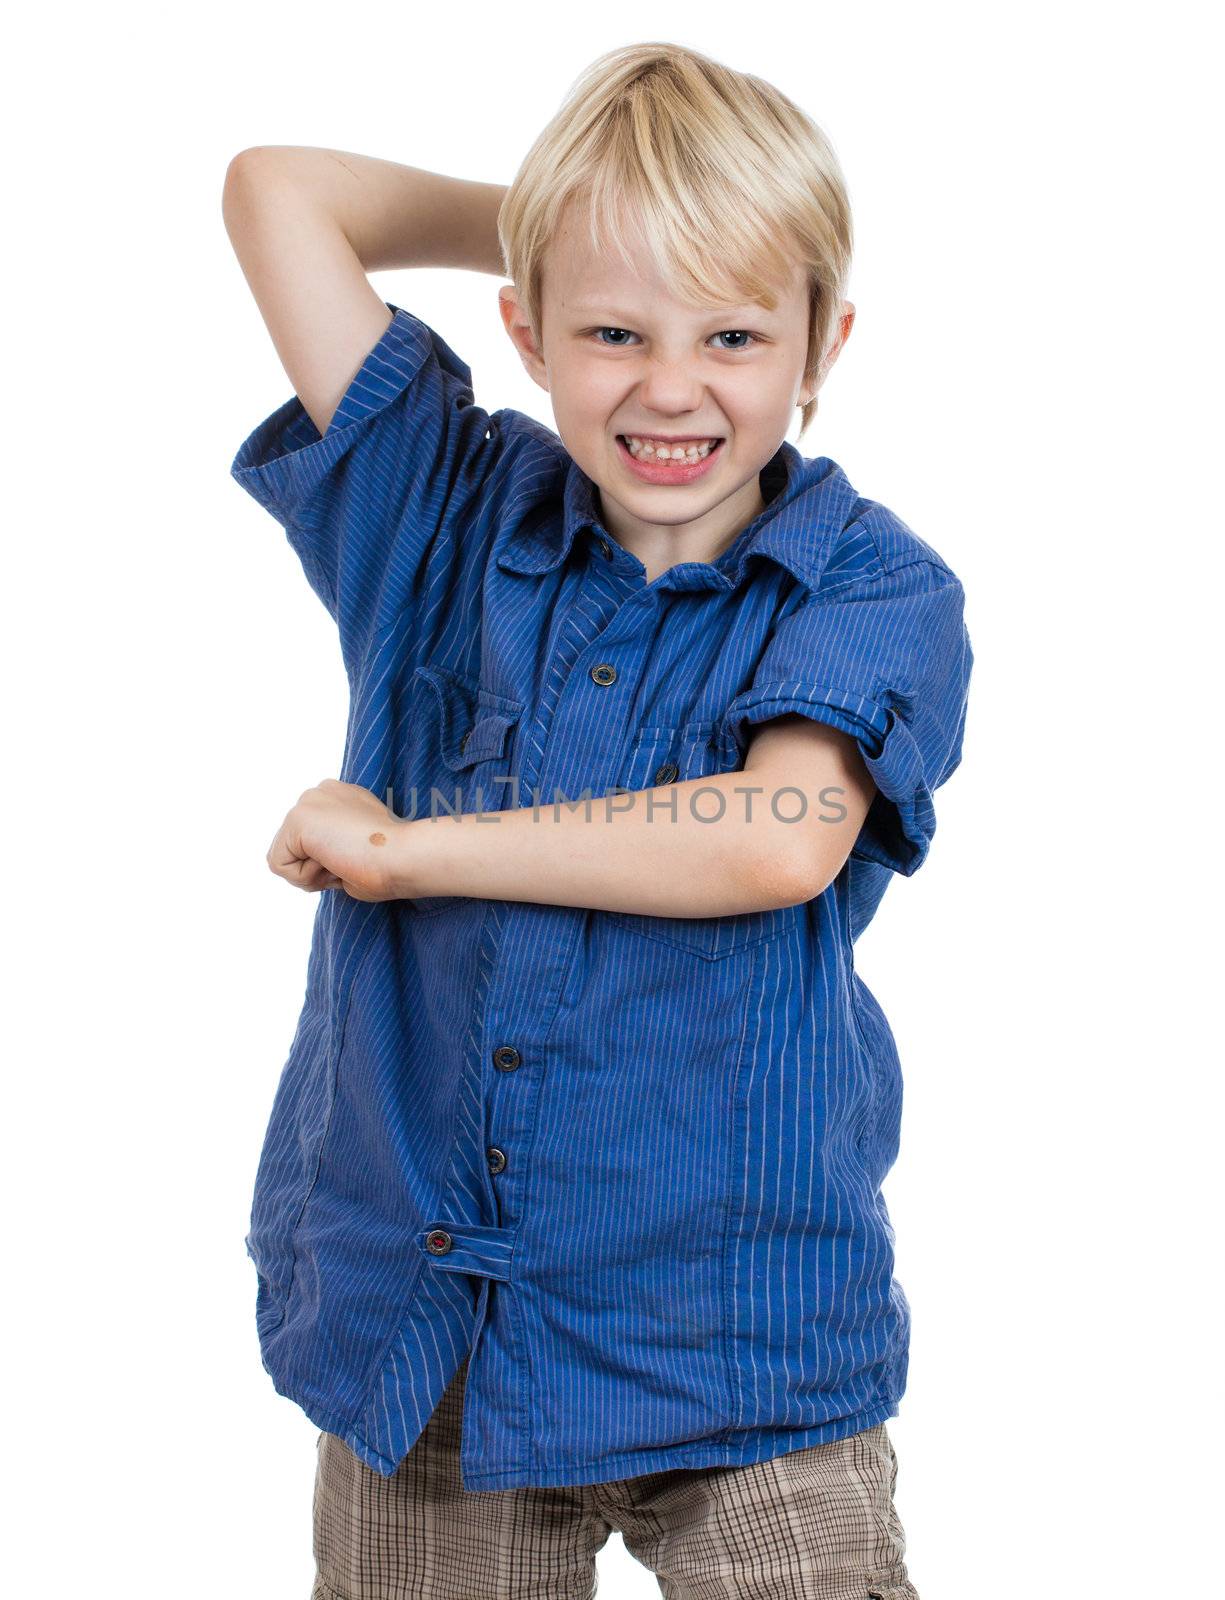 An aggressive young boy about to hit. Isolated on white.